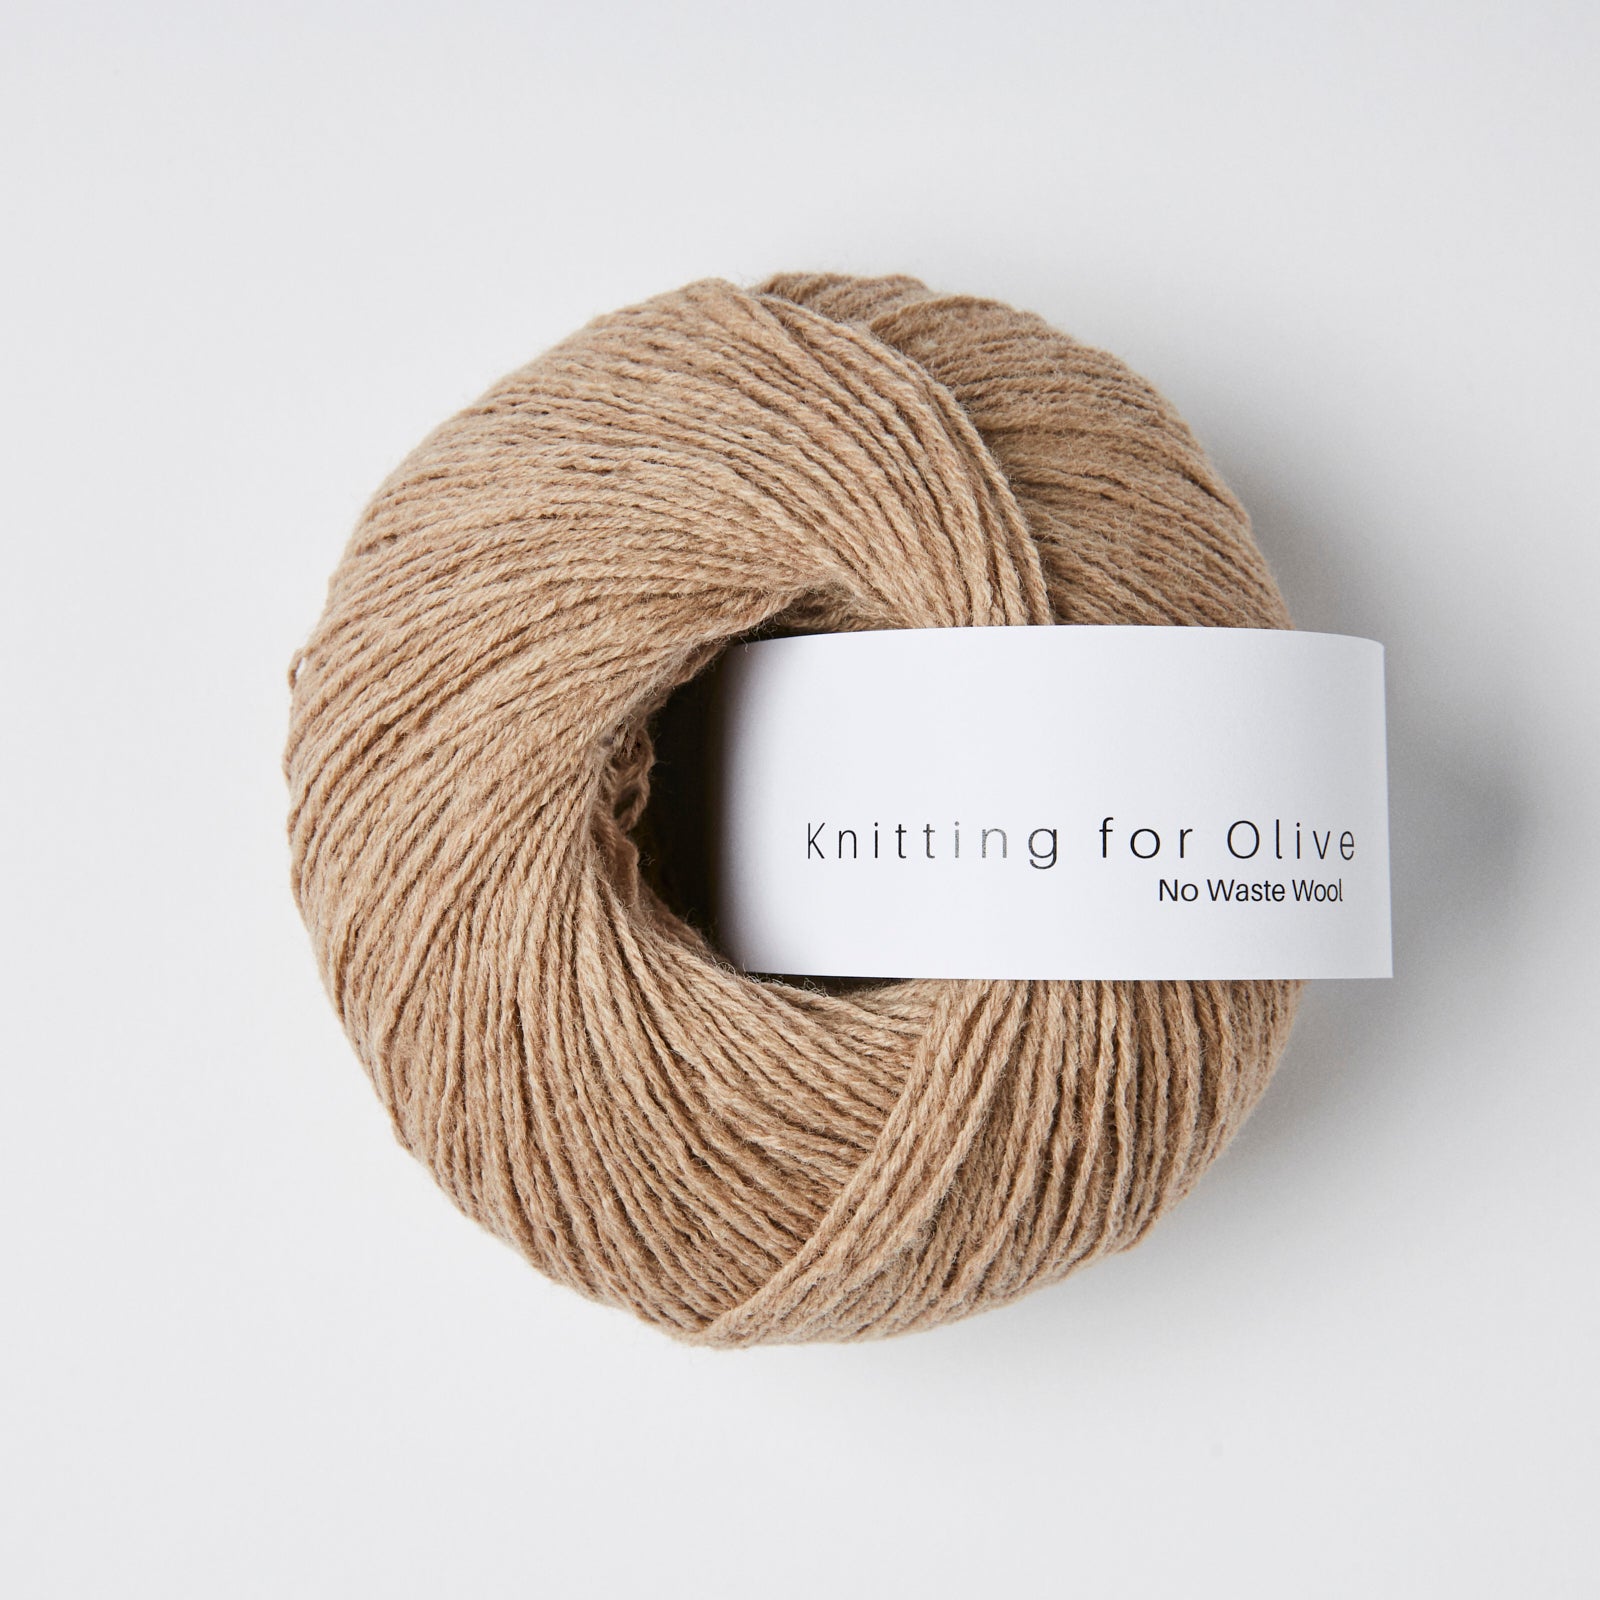 Knitting for Olive No Waste Wool - Sparrow